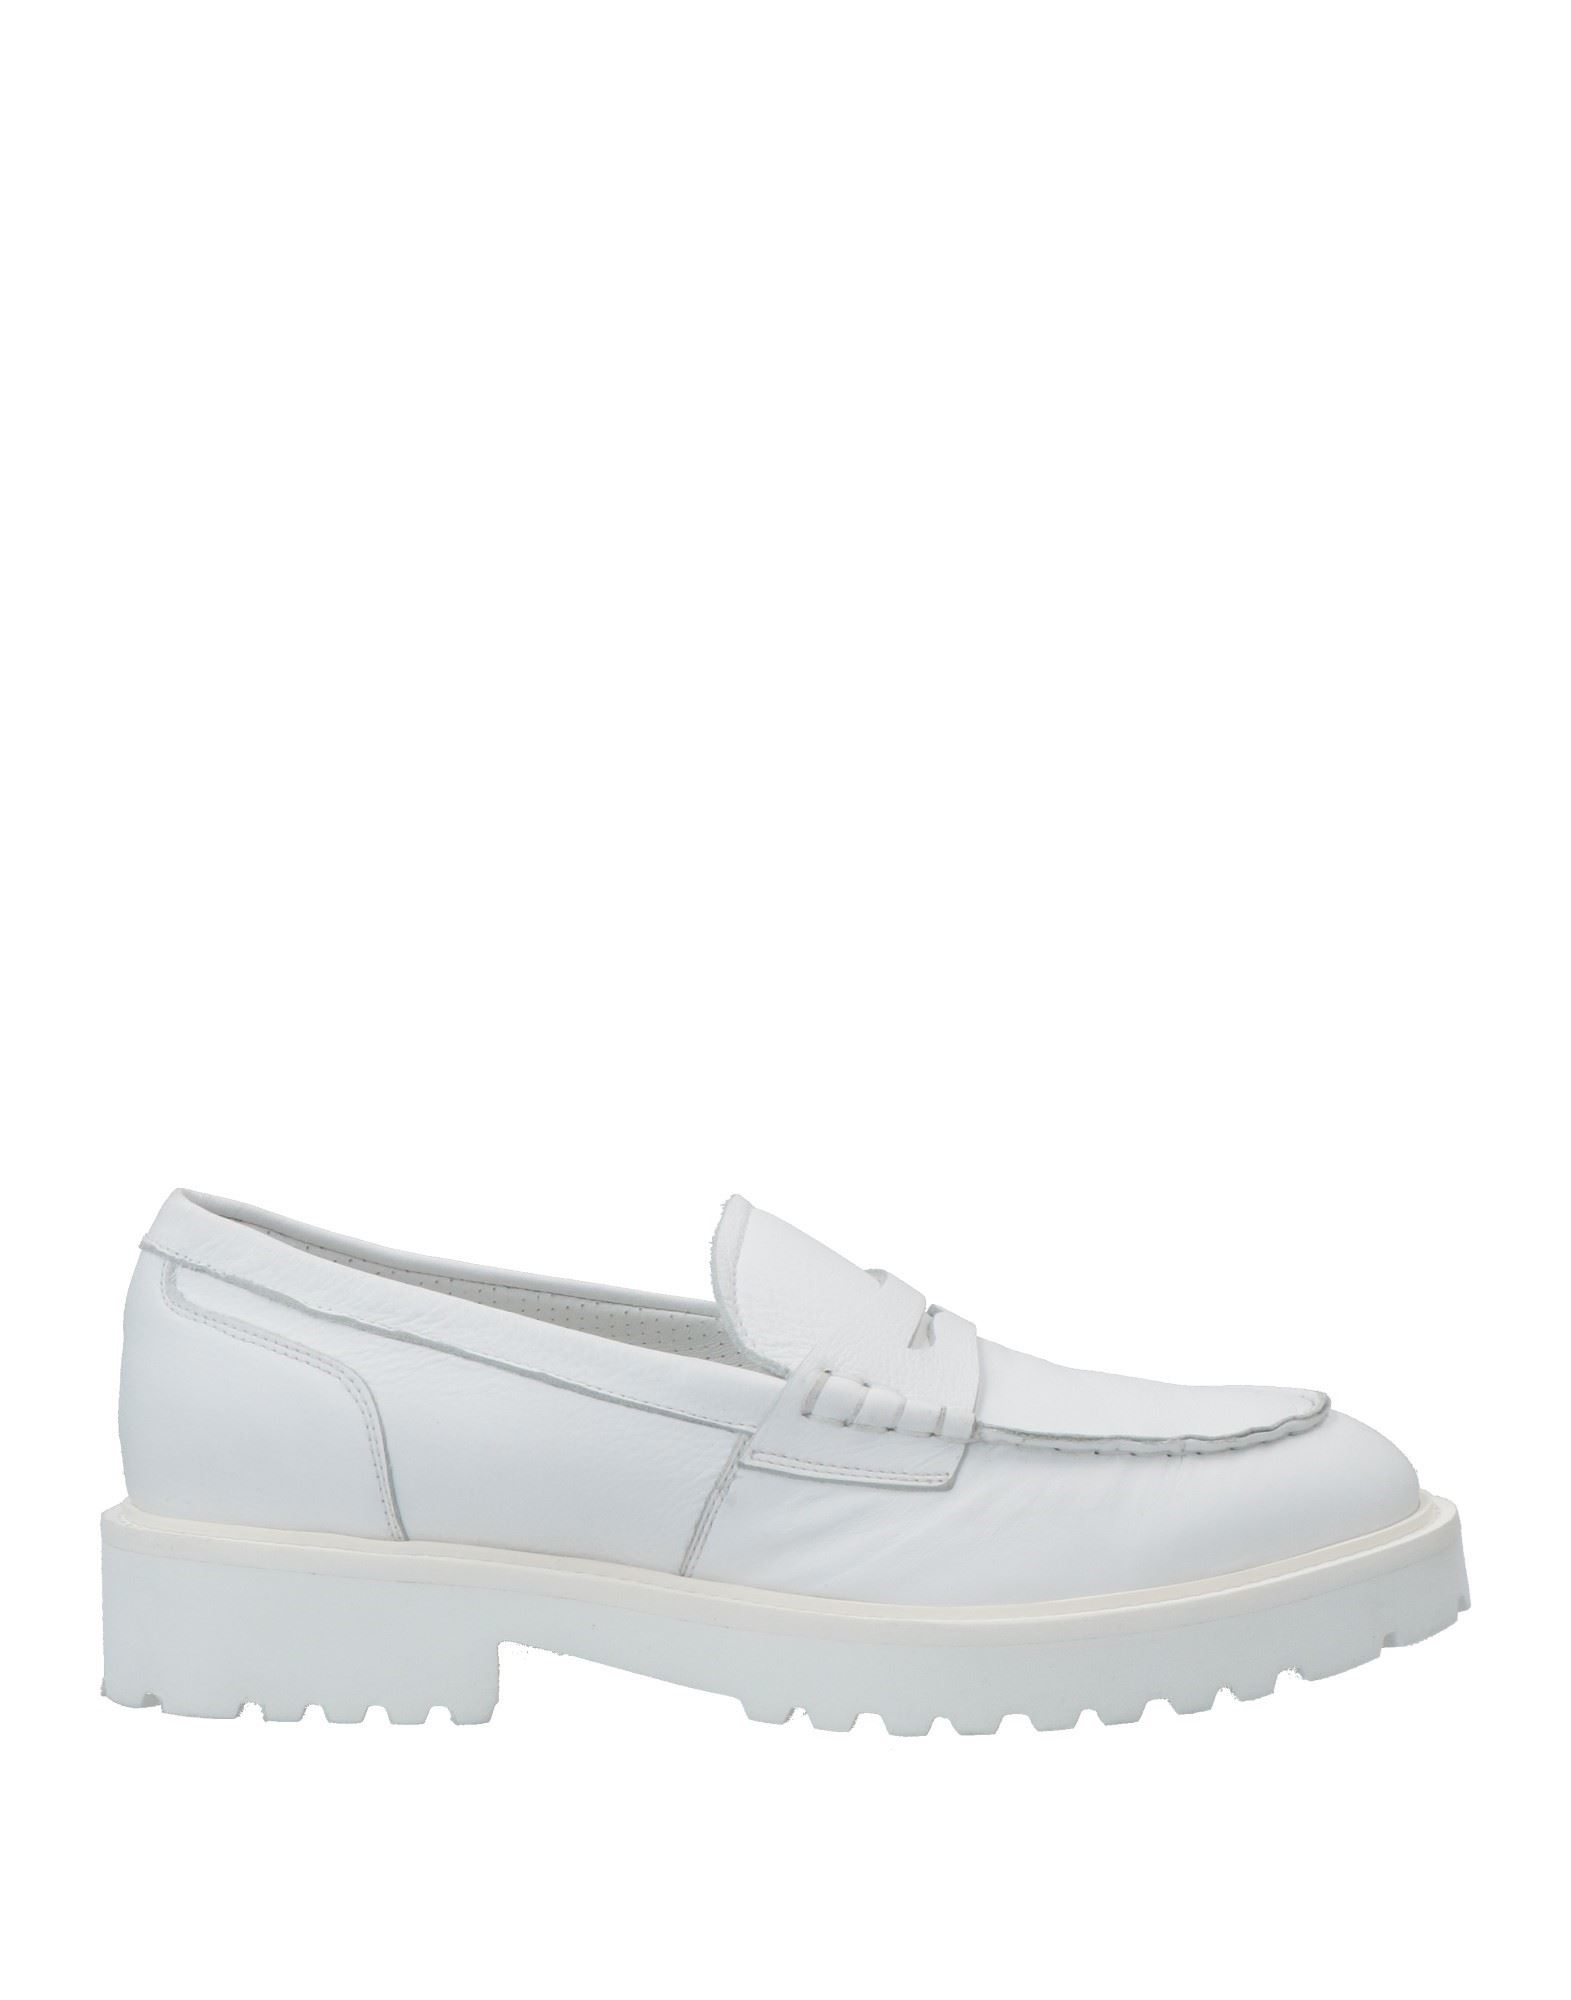 Doucal's Woman Loafers White Size 7.5 Soft Leather